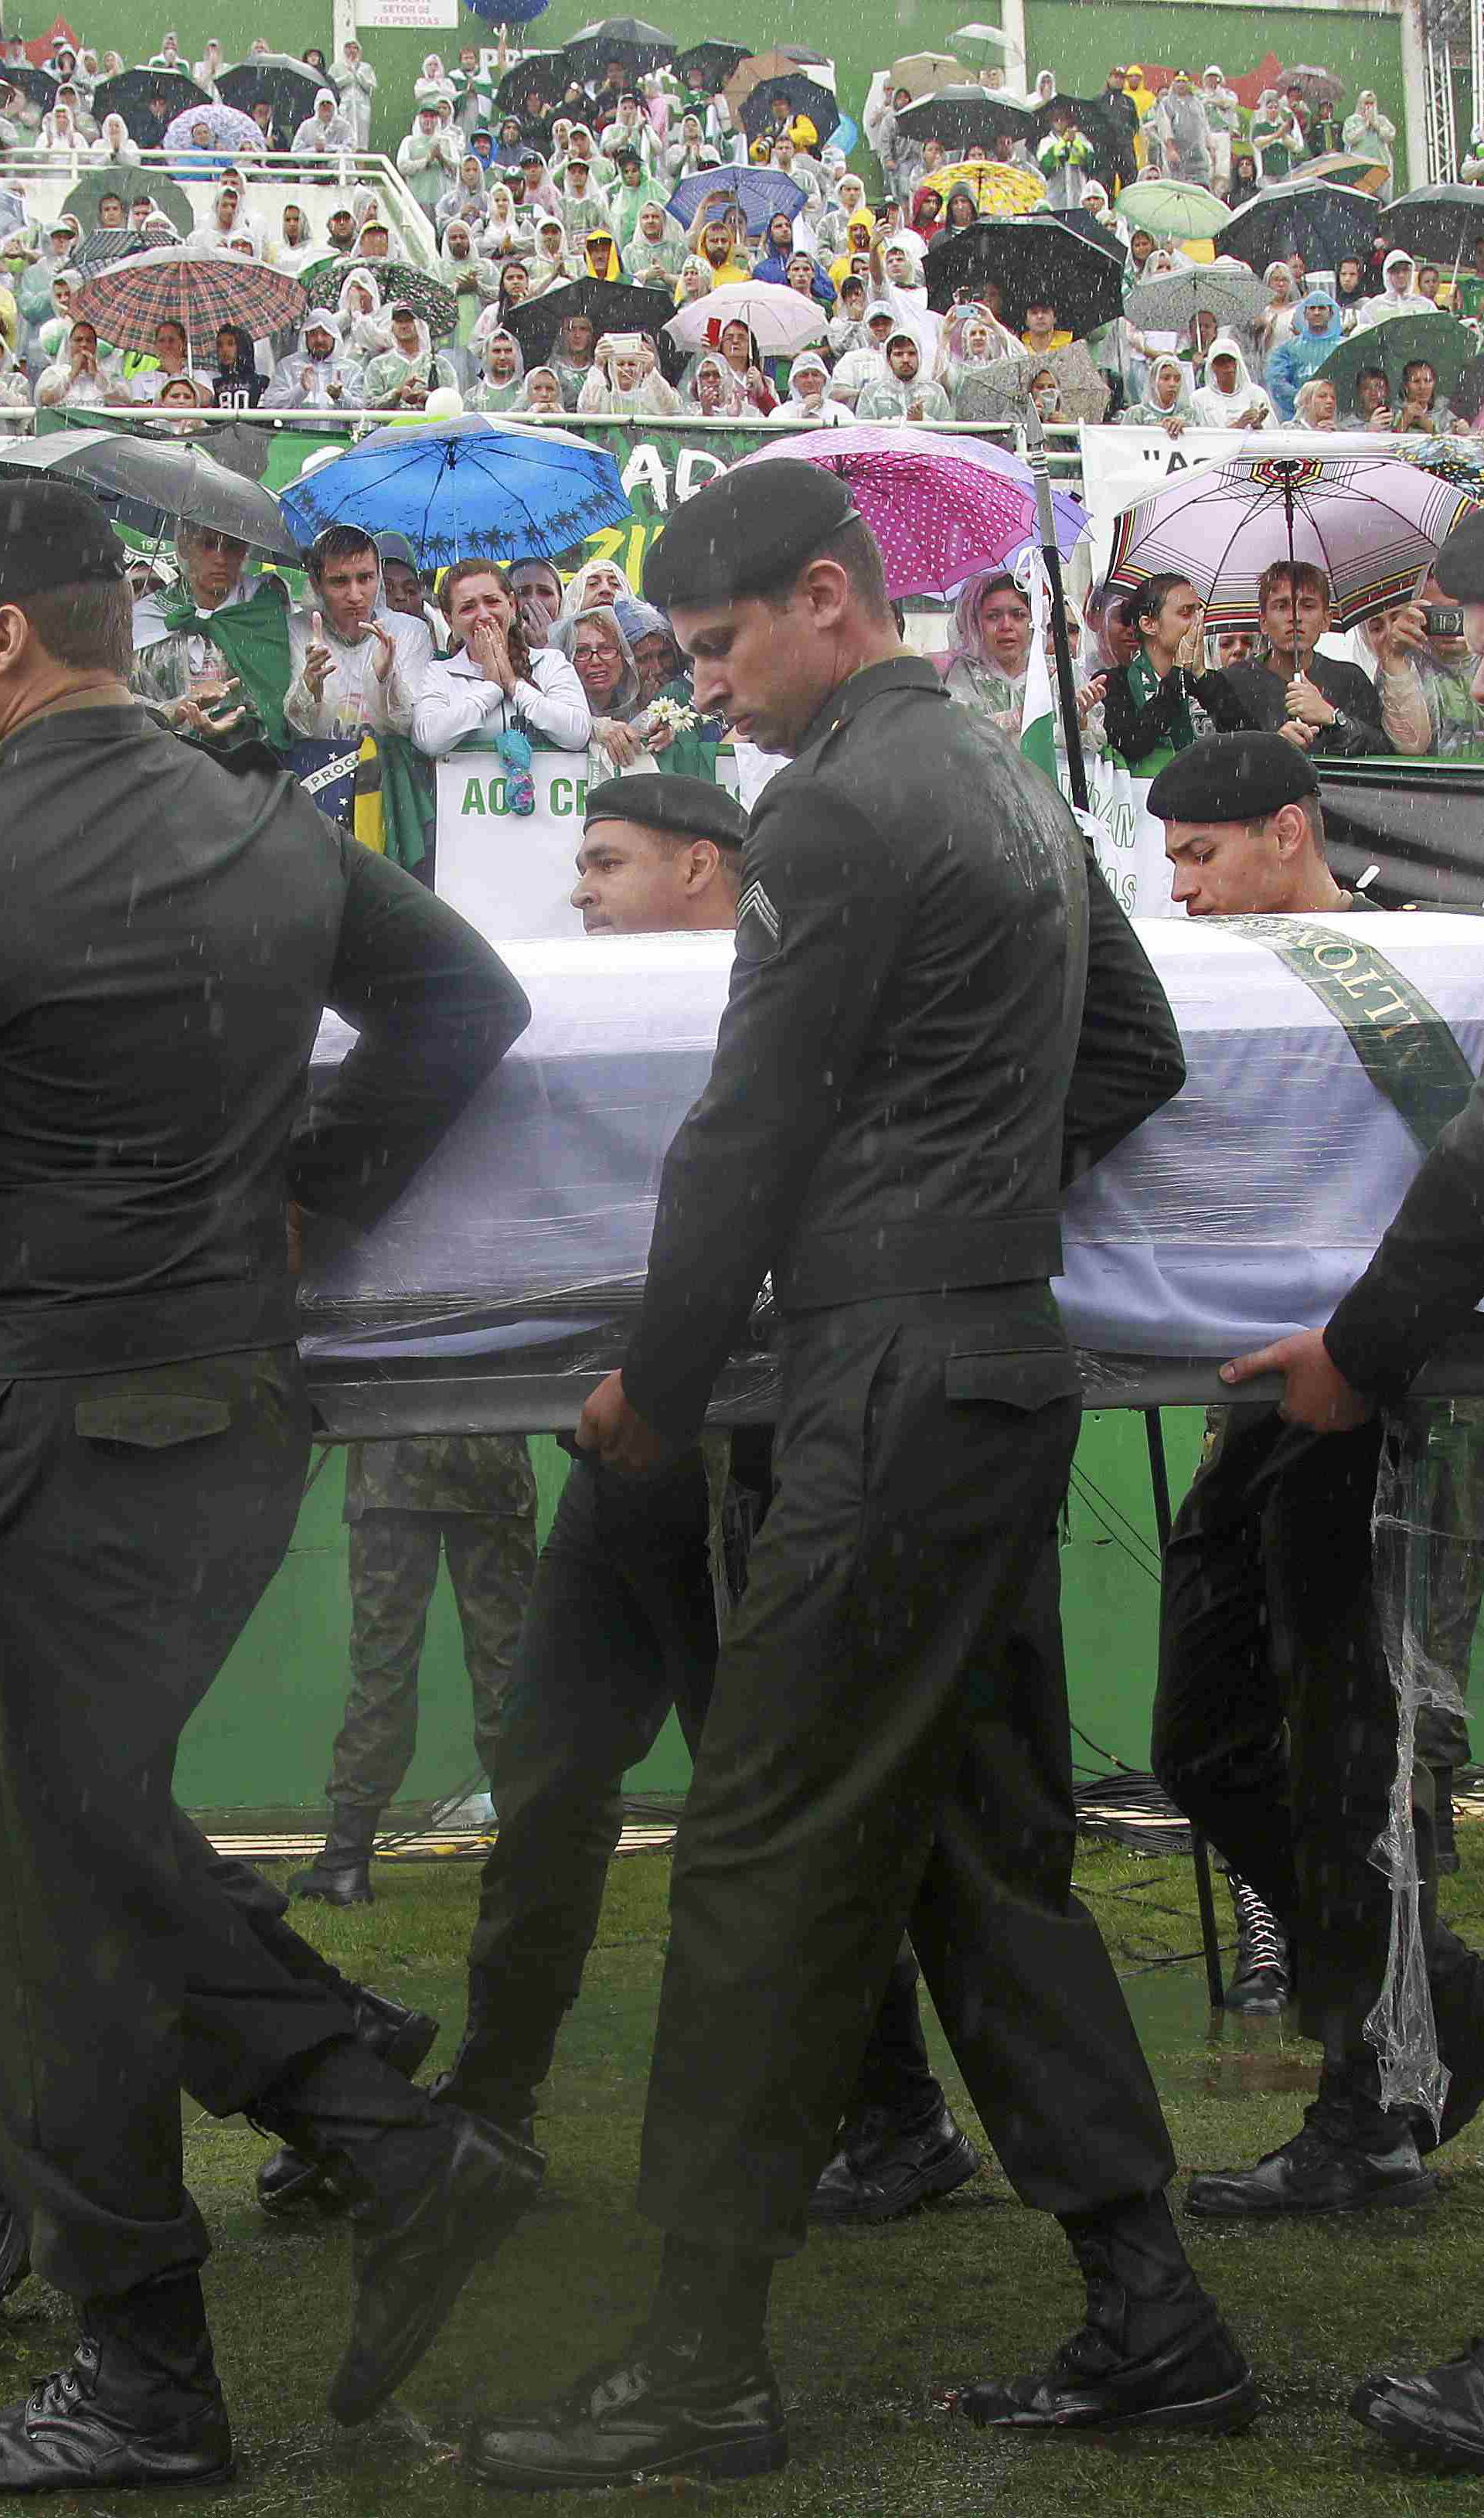 The coffin of one of the victims of the plane crash in Colombia arrives at the Arena Conda stadium in Chapeco